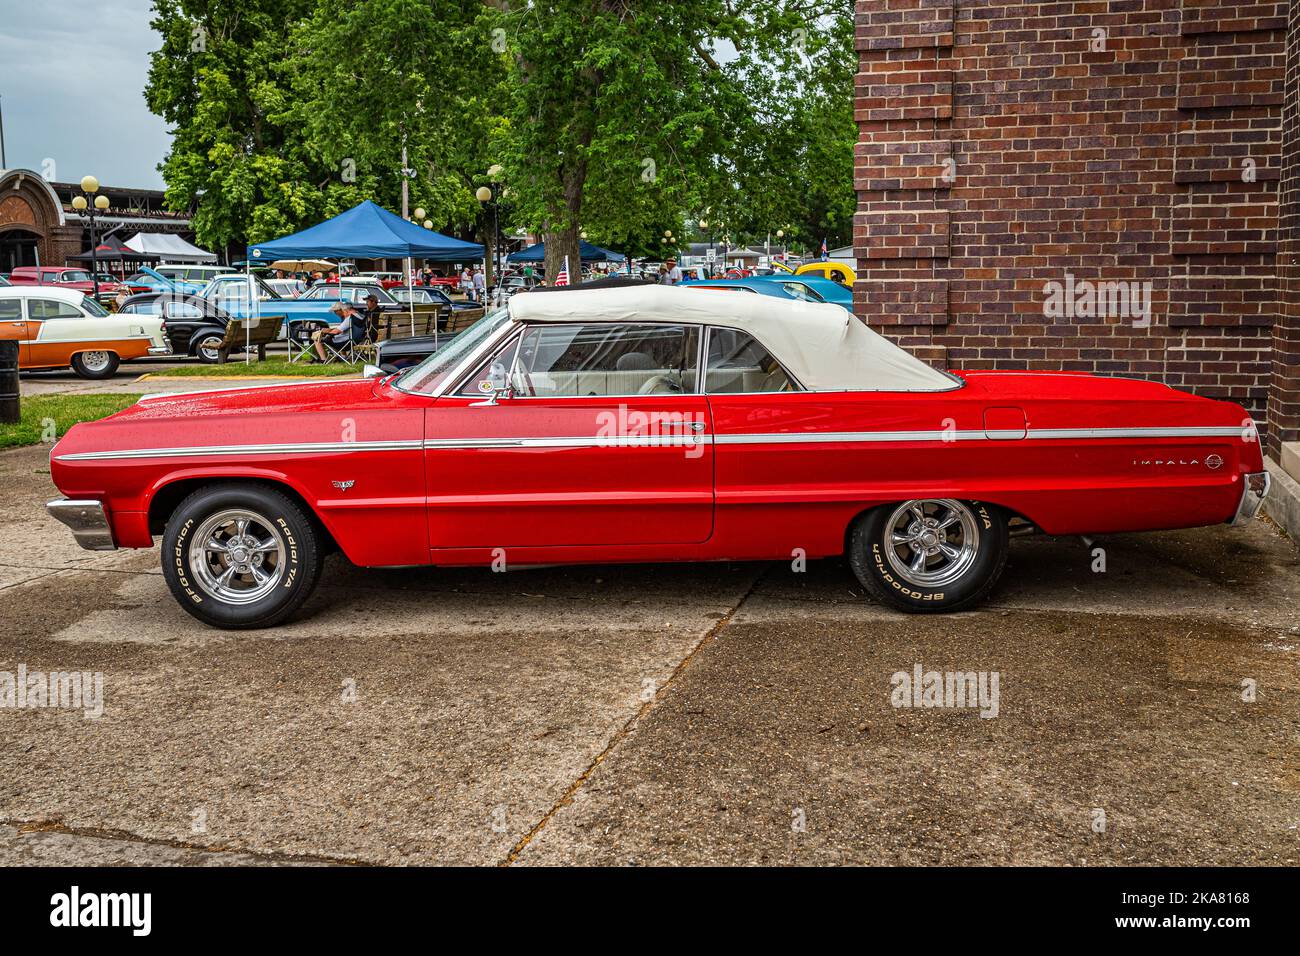 Des Moines, IA - July 01, 2022: High perspective side view of a 1964 Chevrolet Impala SS Convertible at a local car show. Stock Photo